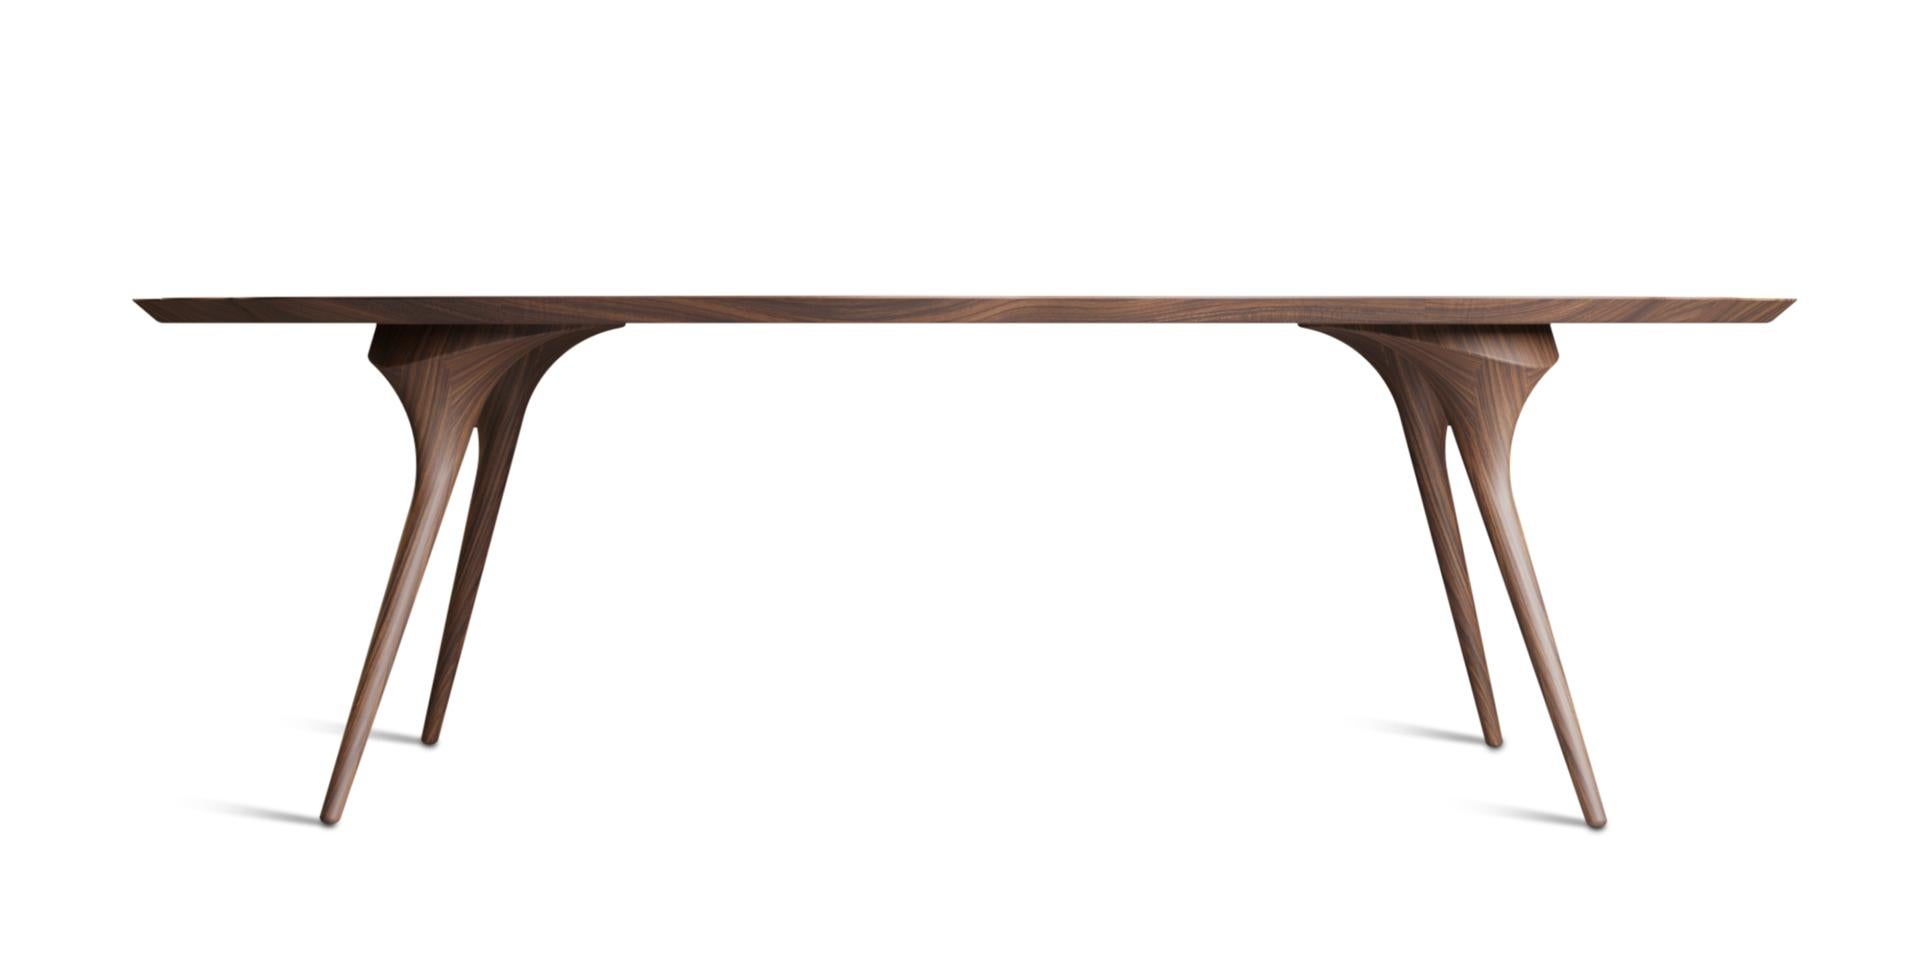 In a reconnection with the sense of community, Alma de Luce presents the Korowai Dining table. This table in solid walnut wood and white estremoz marble has an elegant style with sculptural features like houses built more than thirty meters from the